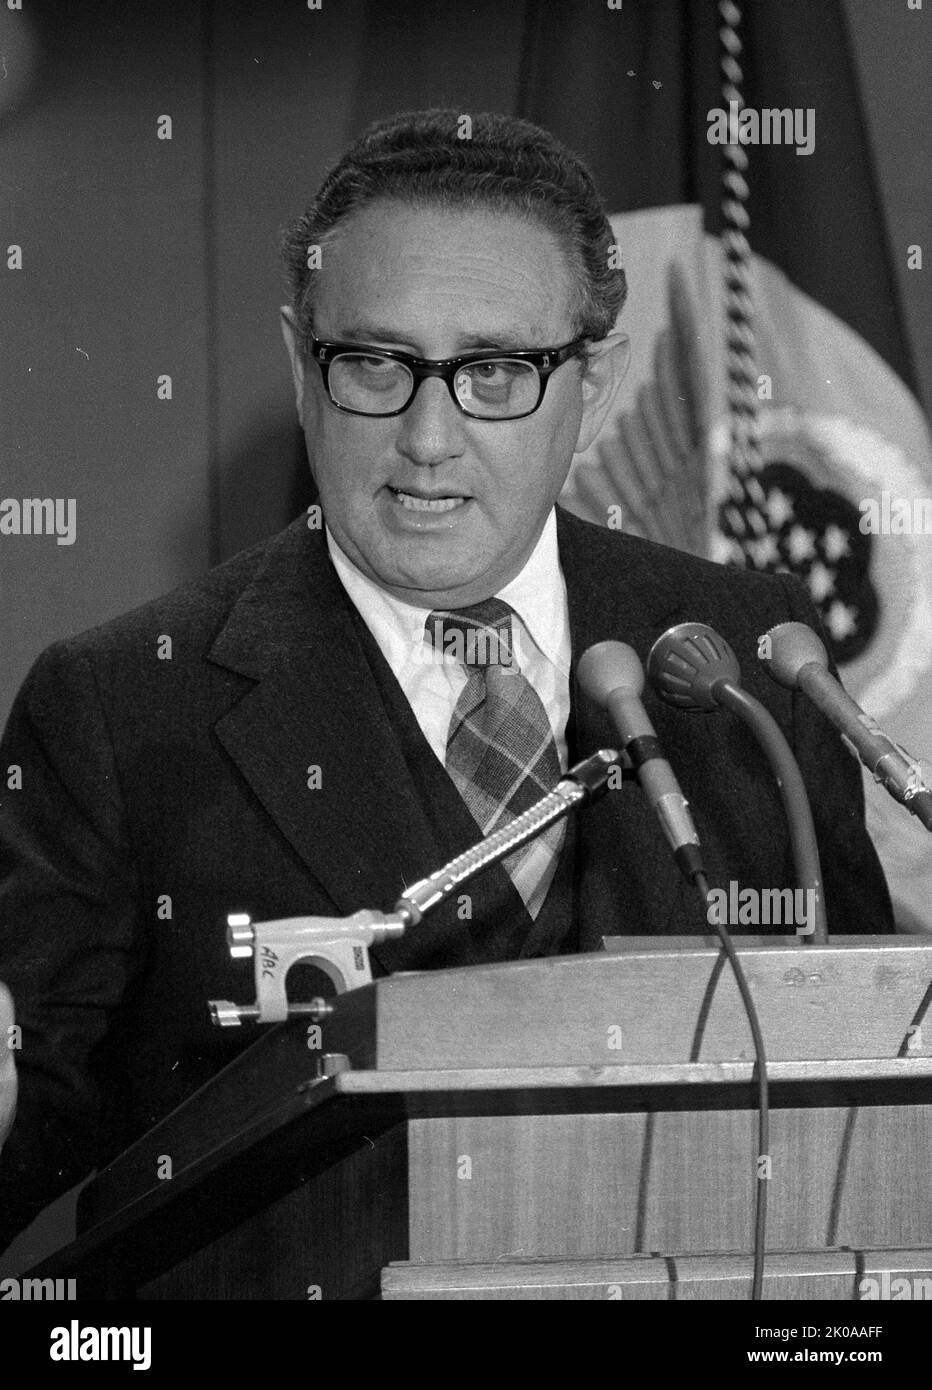 U.S. Secretary of State Henry Kissinger, half-length portrait, standing behind a podium, speaking at a press conference. 1975. Henry Alfred Kissinger KCMG (May 27, 1923) is a German-born American politician, diplomat, and geopolitical consultant who served as United States Secretary of State and National Security Advisor under the presidential administrations of Richard Nixon and Gerald Ford Stock Photo